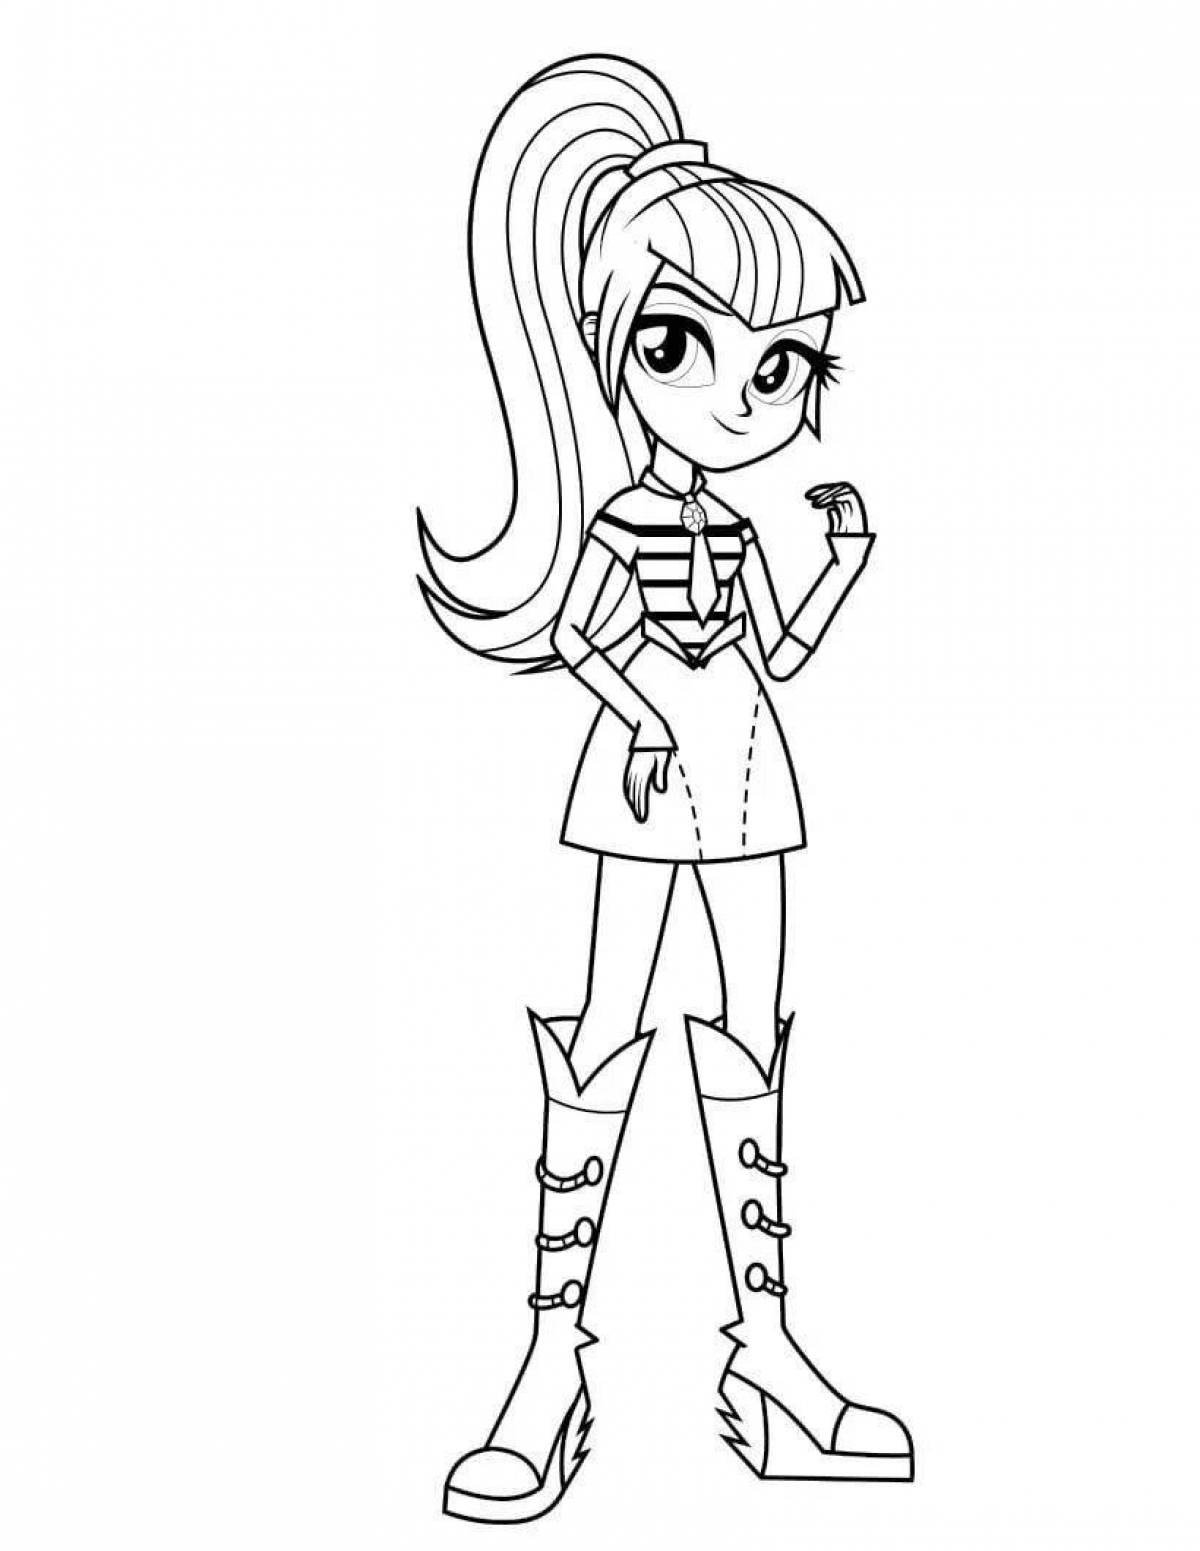 Coloring page pony equestria girls my little